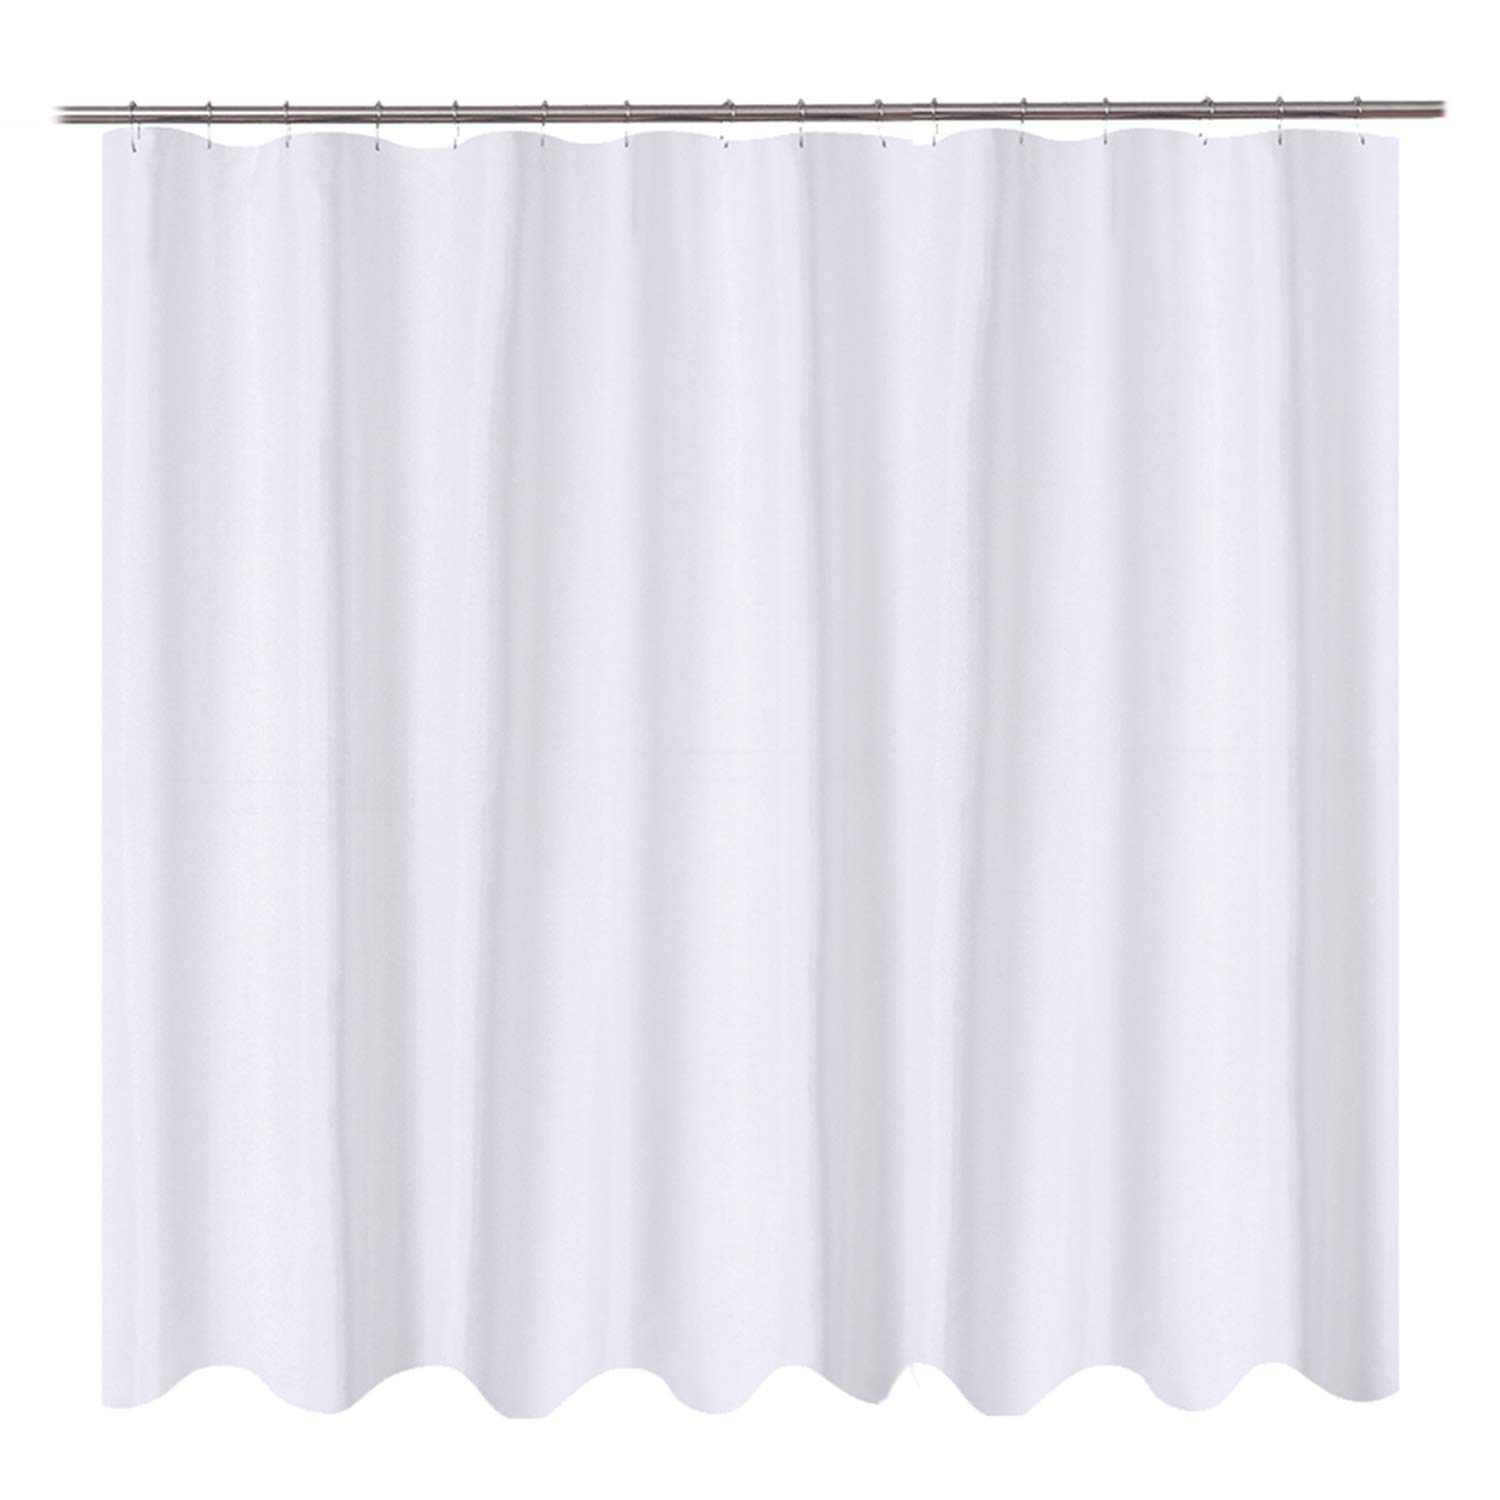 Book Cover N&Y HOME Fabric Shower Curtain Liner 96 x 78 inch XL Size, Hotel Quality, Washable, Water Repellent, White Bathroom Curtains with Grommets, 96x78 White 96